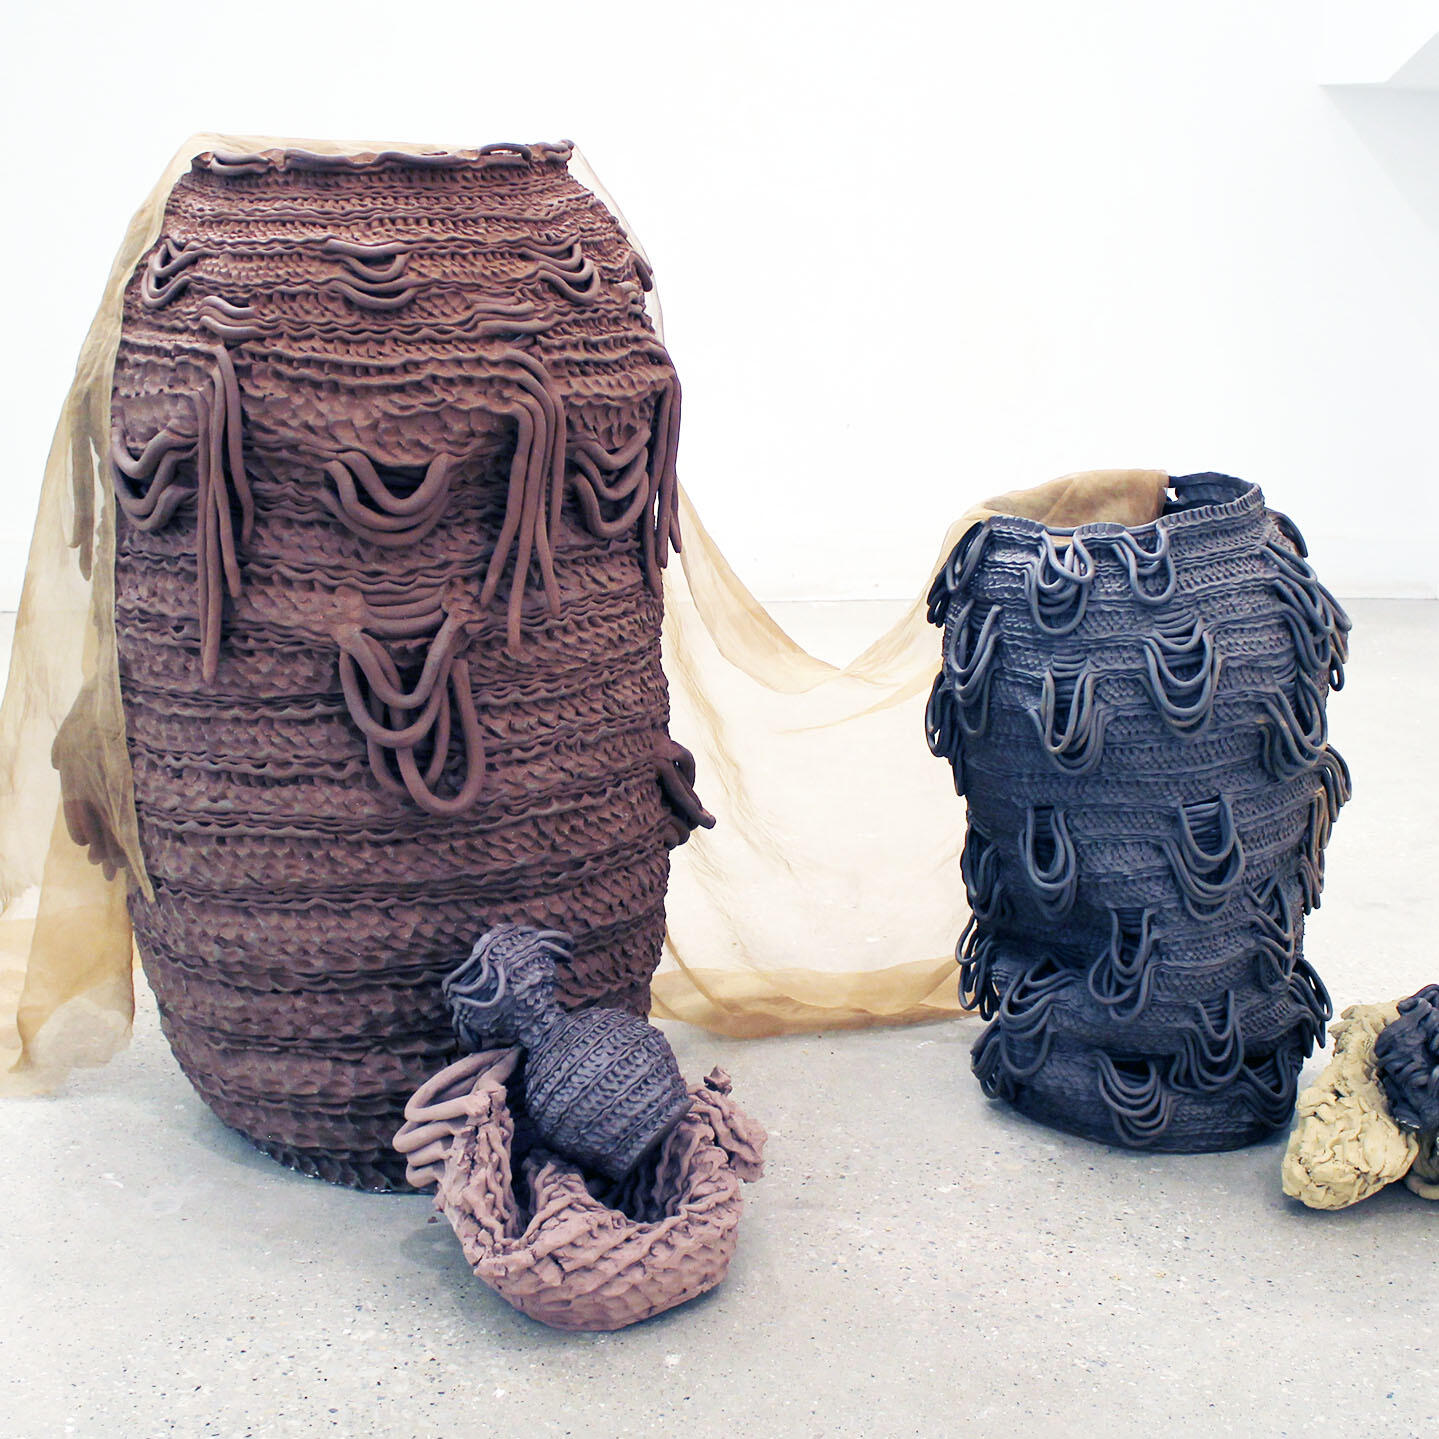 Coiled pots of different colors and fabric by Shea Burke.